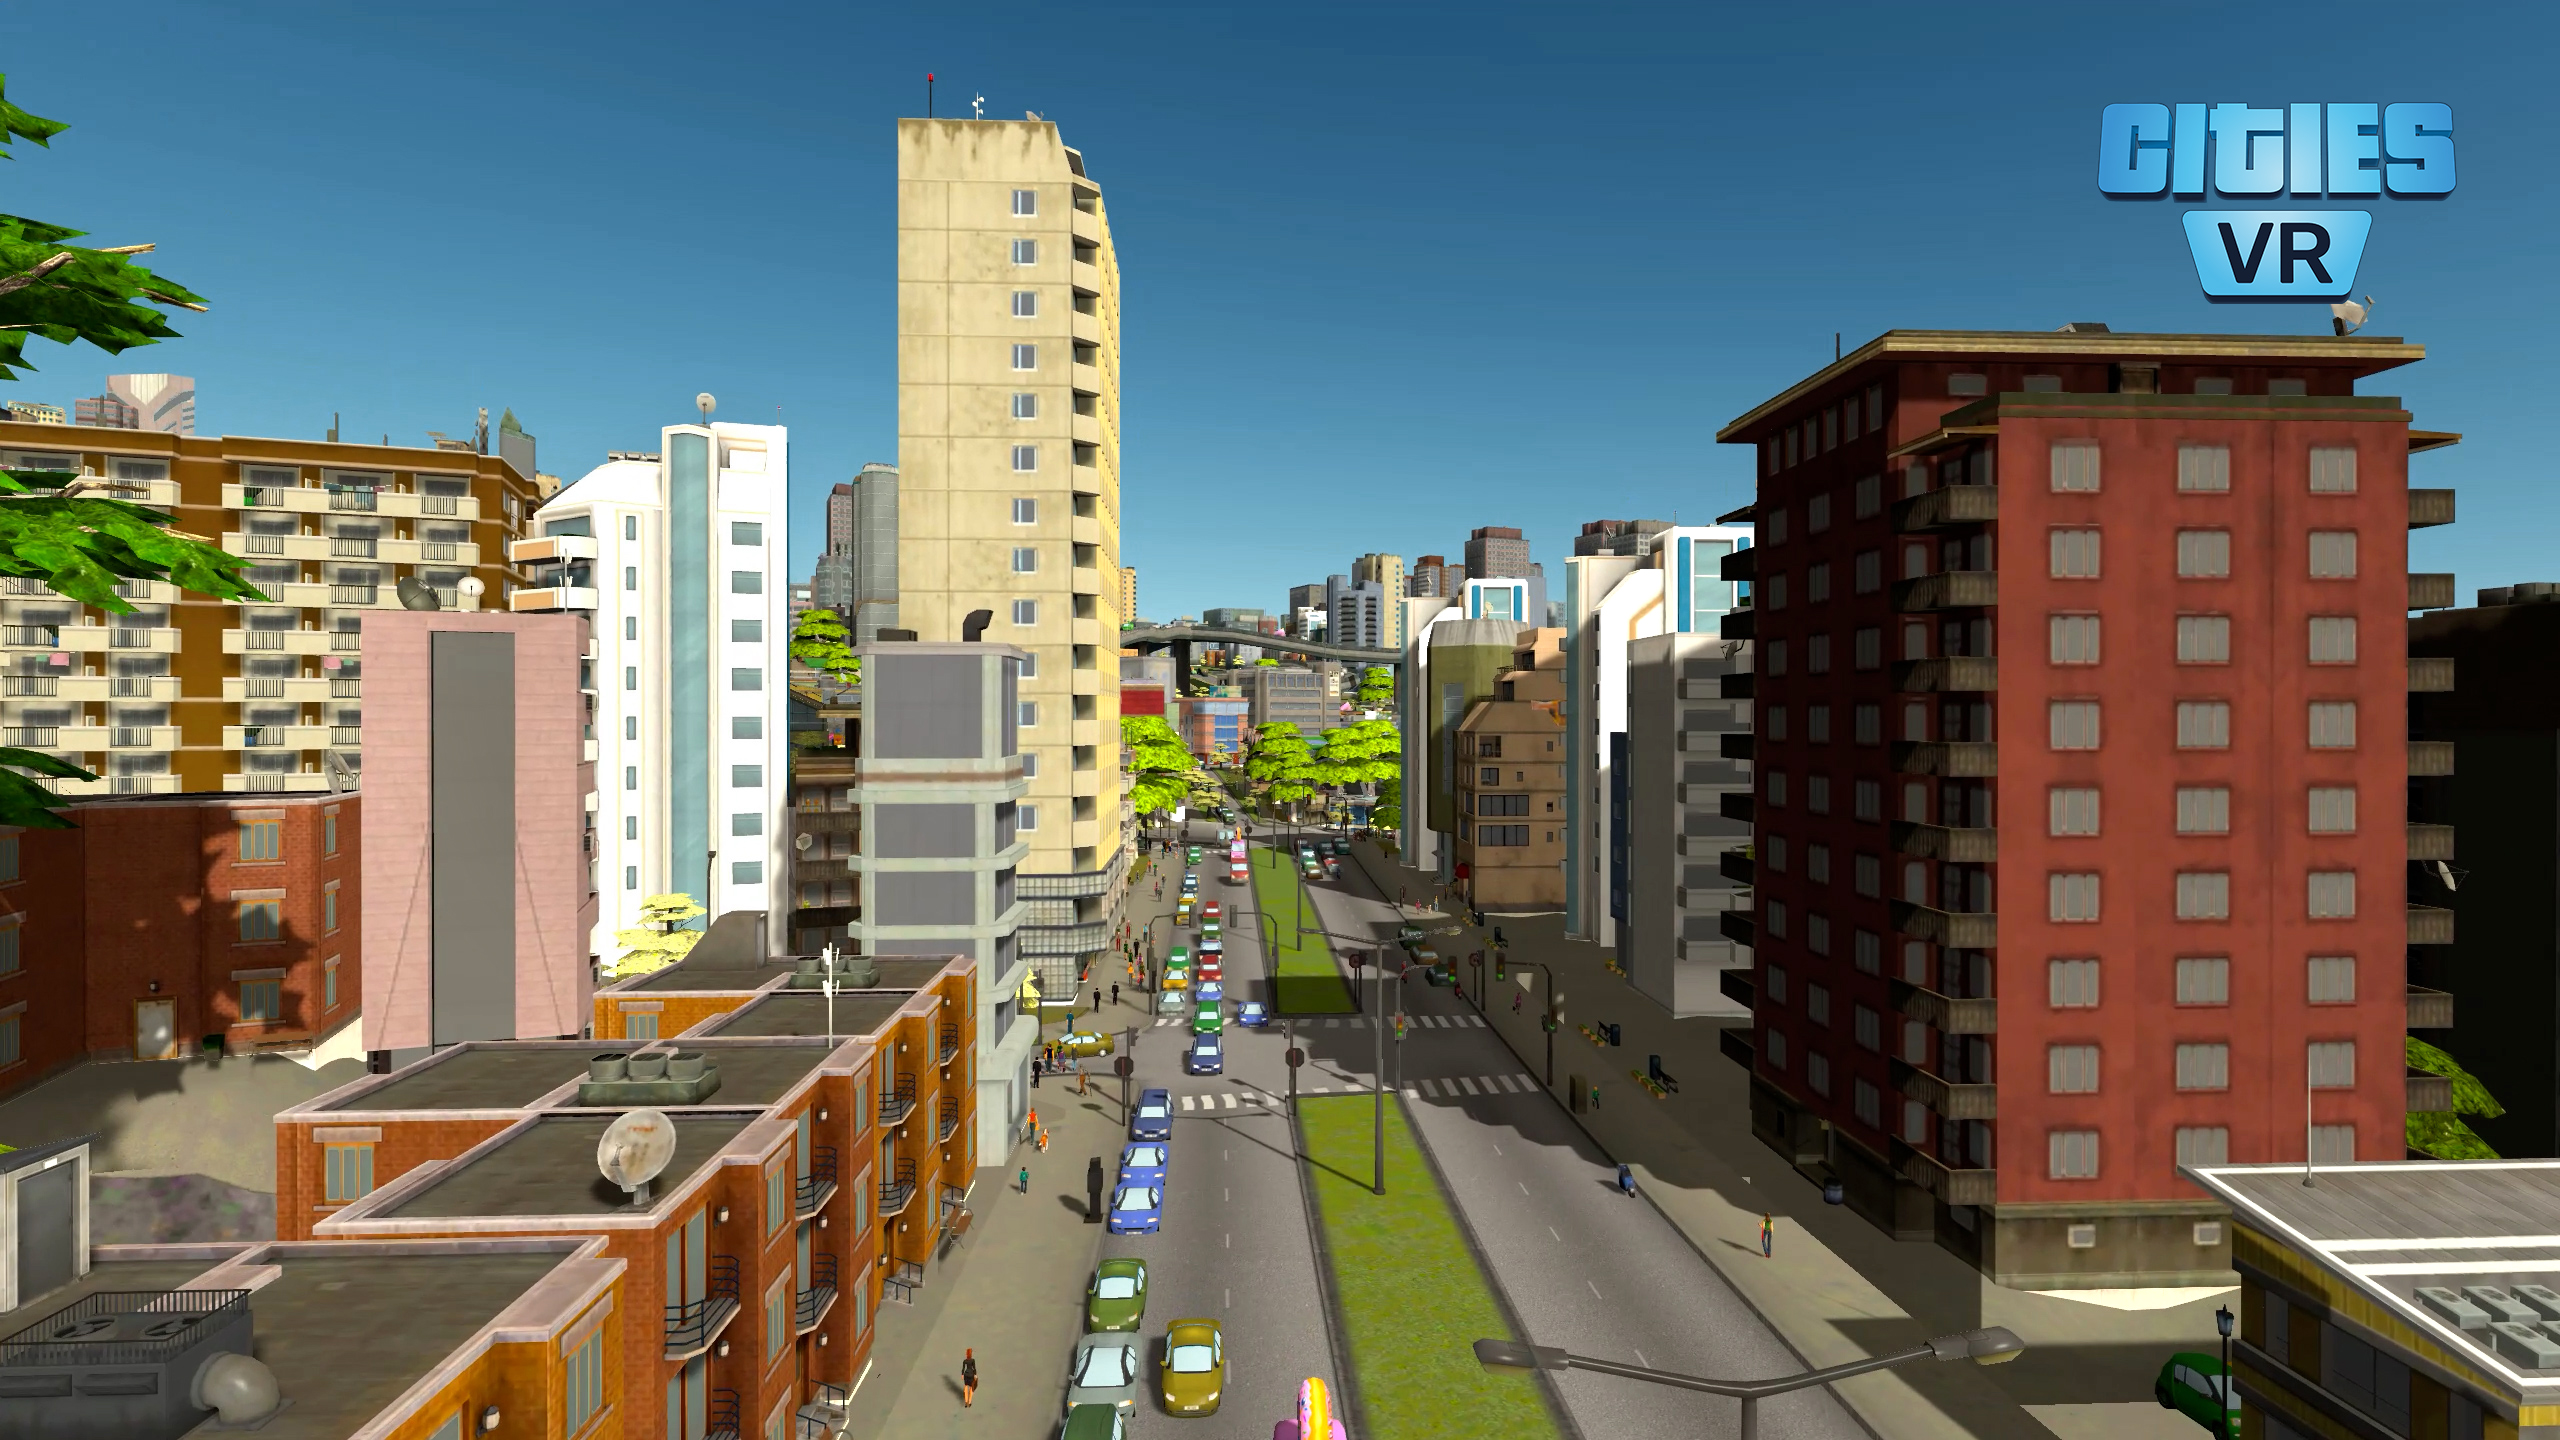 Cities: Skylines is heading to VR